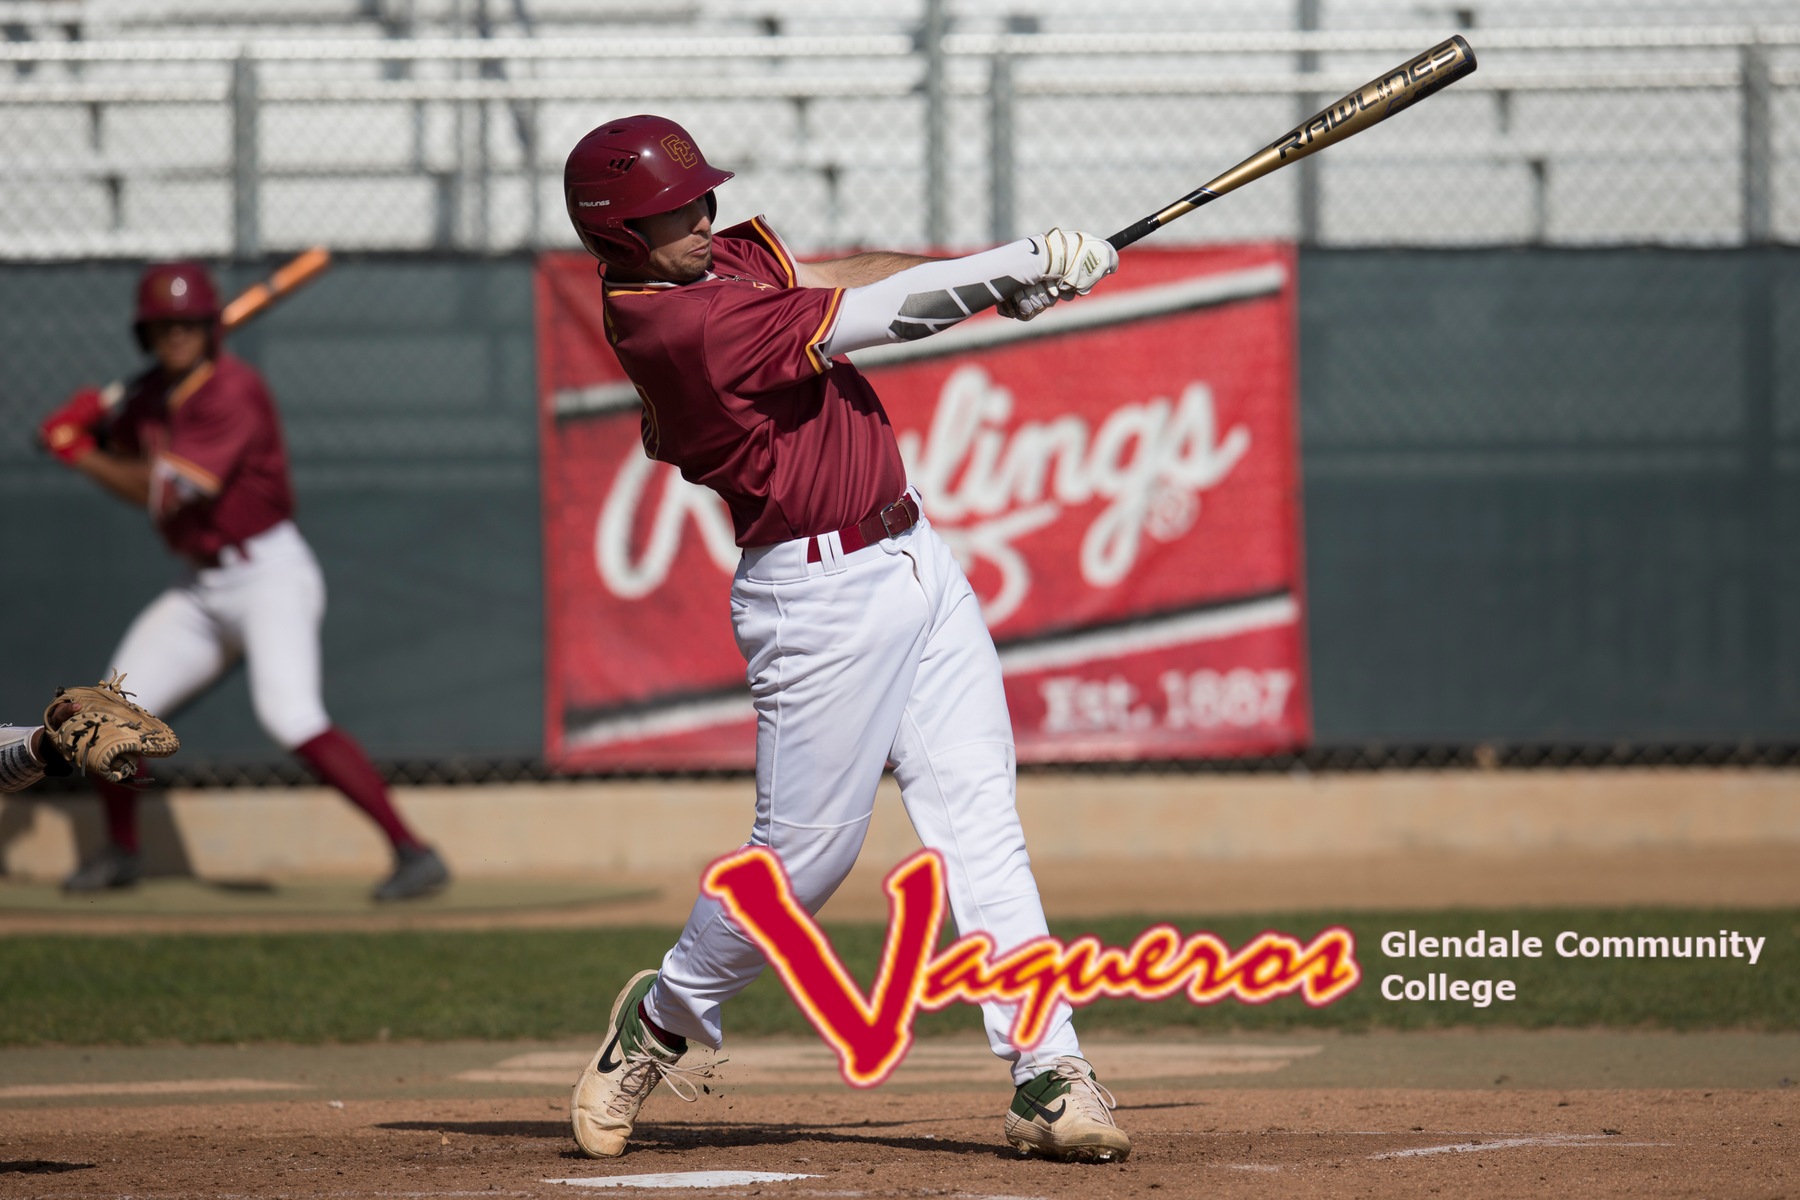 Aaron Trelaor paces GCC Baseball with three homers in 7-2 win over Mt. SAC